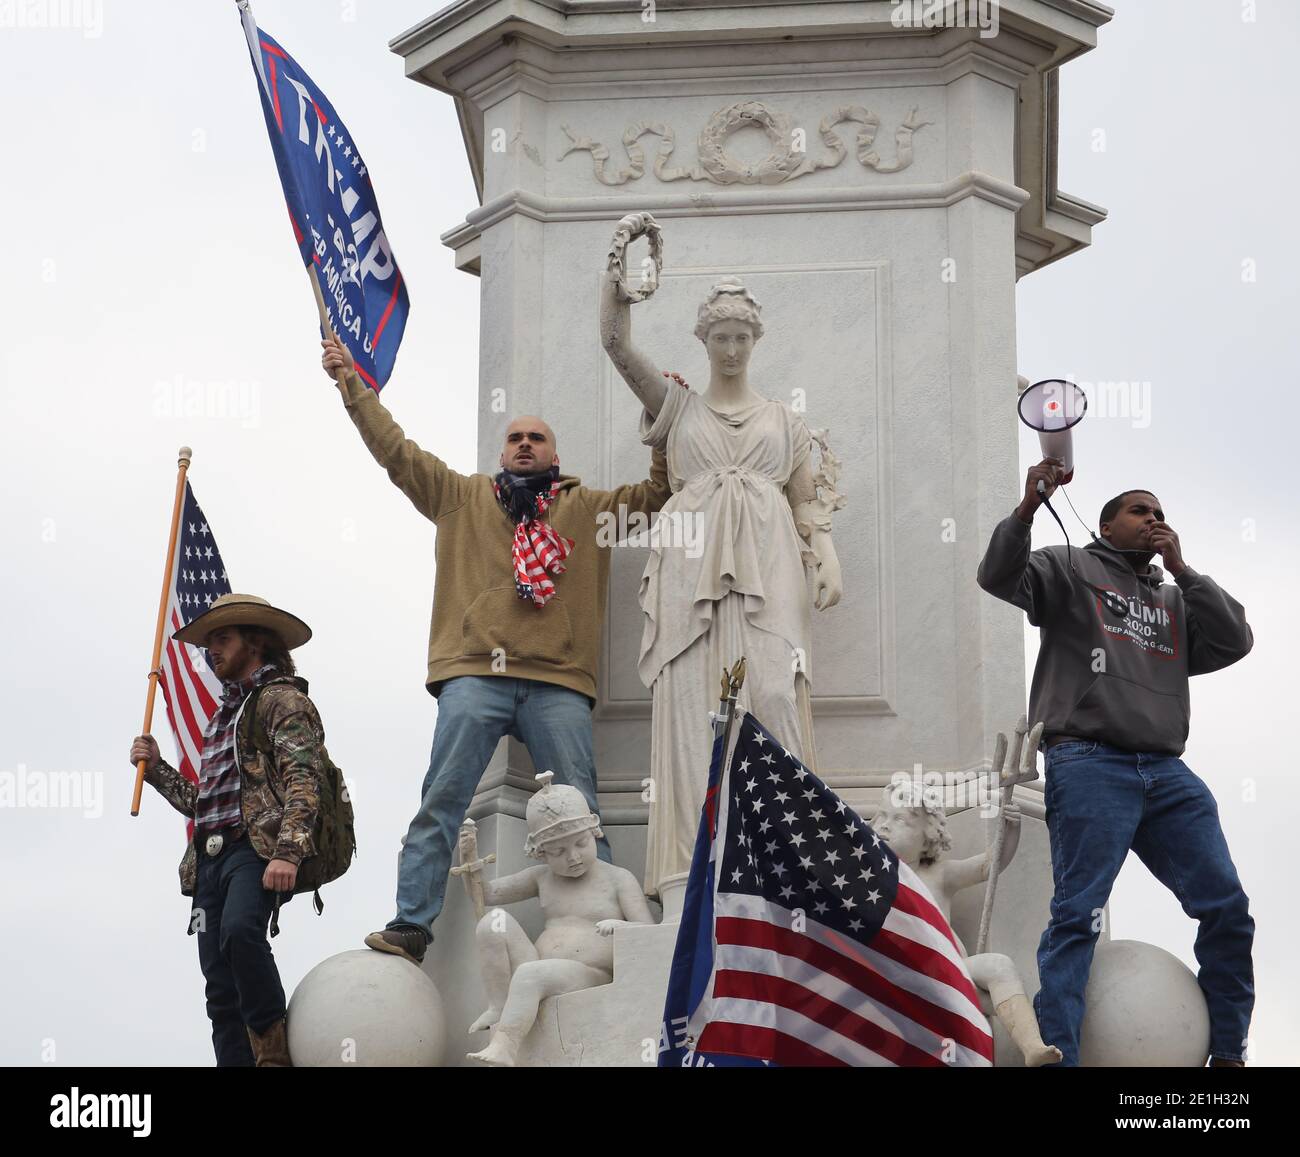 Photos from the January sixth protest at the Capitol building that resulted in 4 deaths. Protestors stormed the innaugural scaffolding and broke into the building despite resistance from officers inside including tear gas. Stock Photo